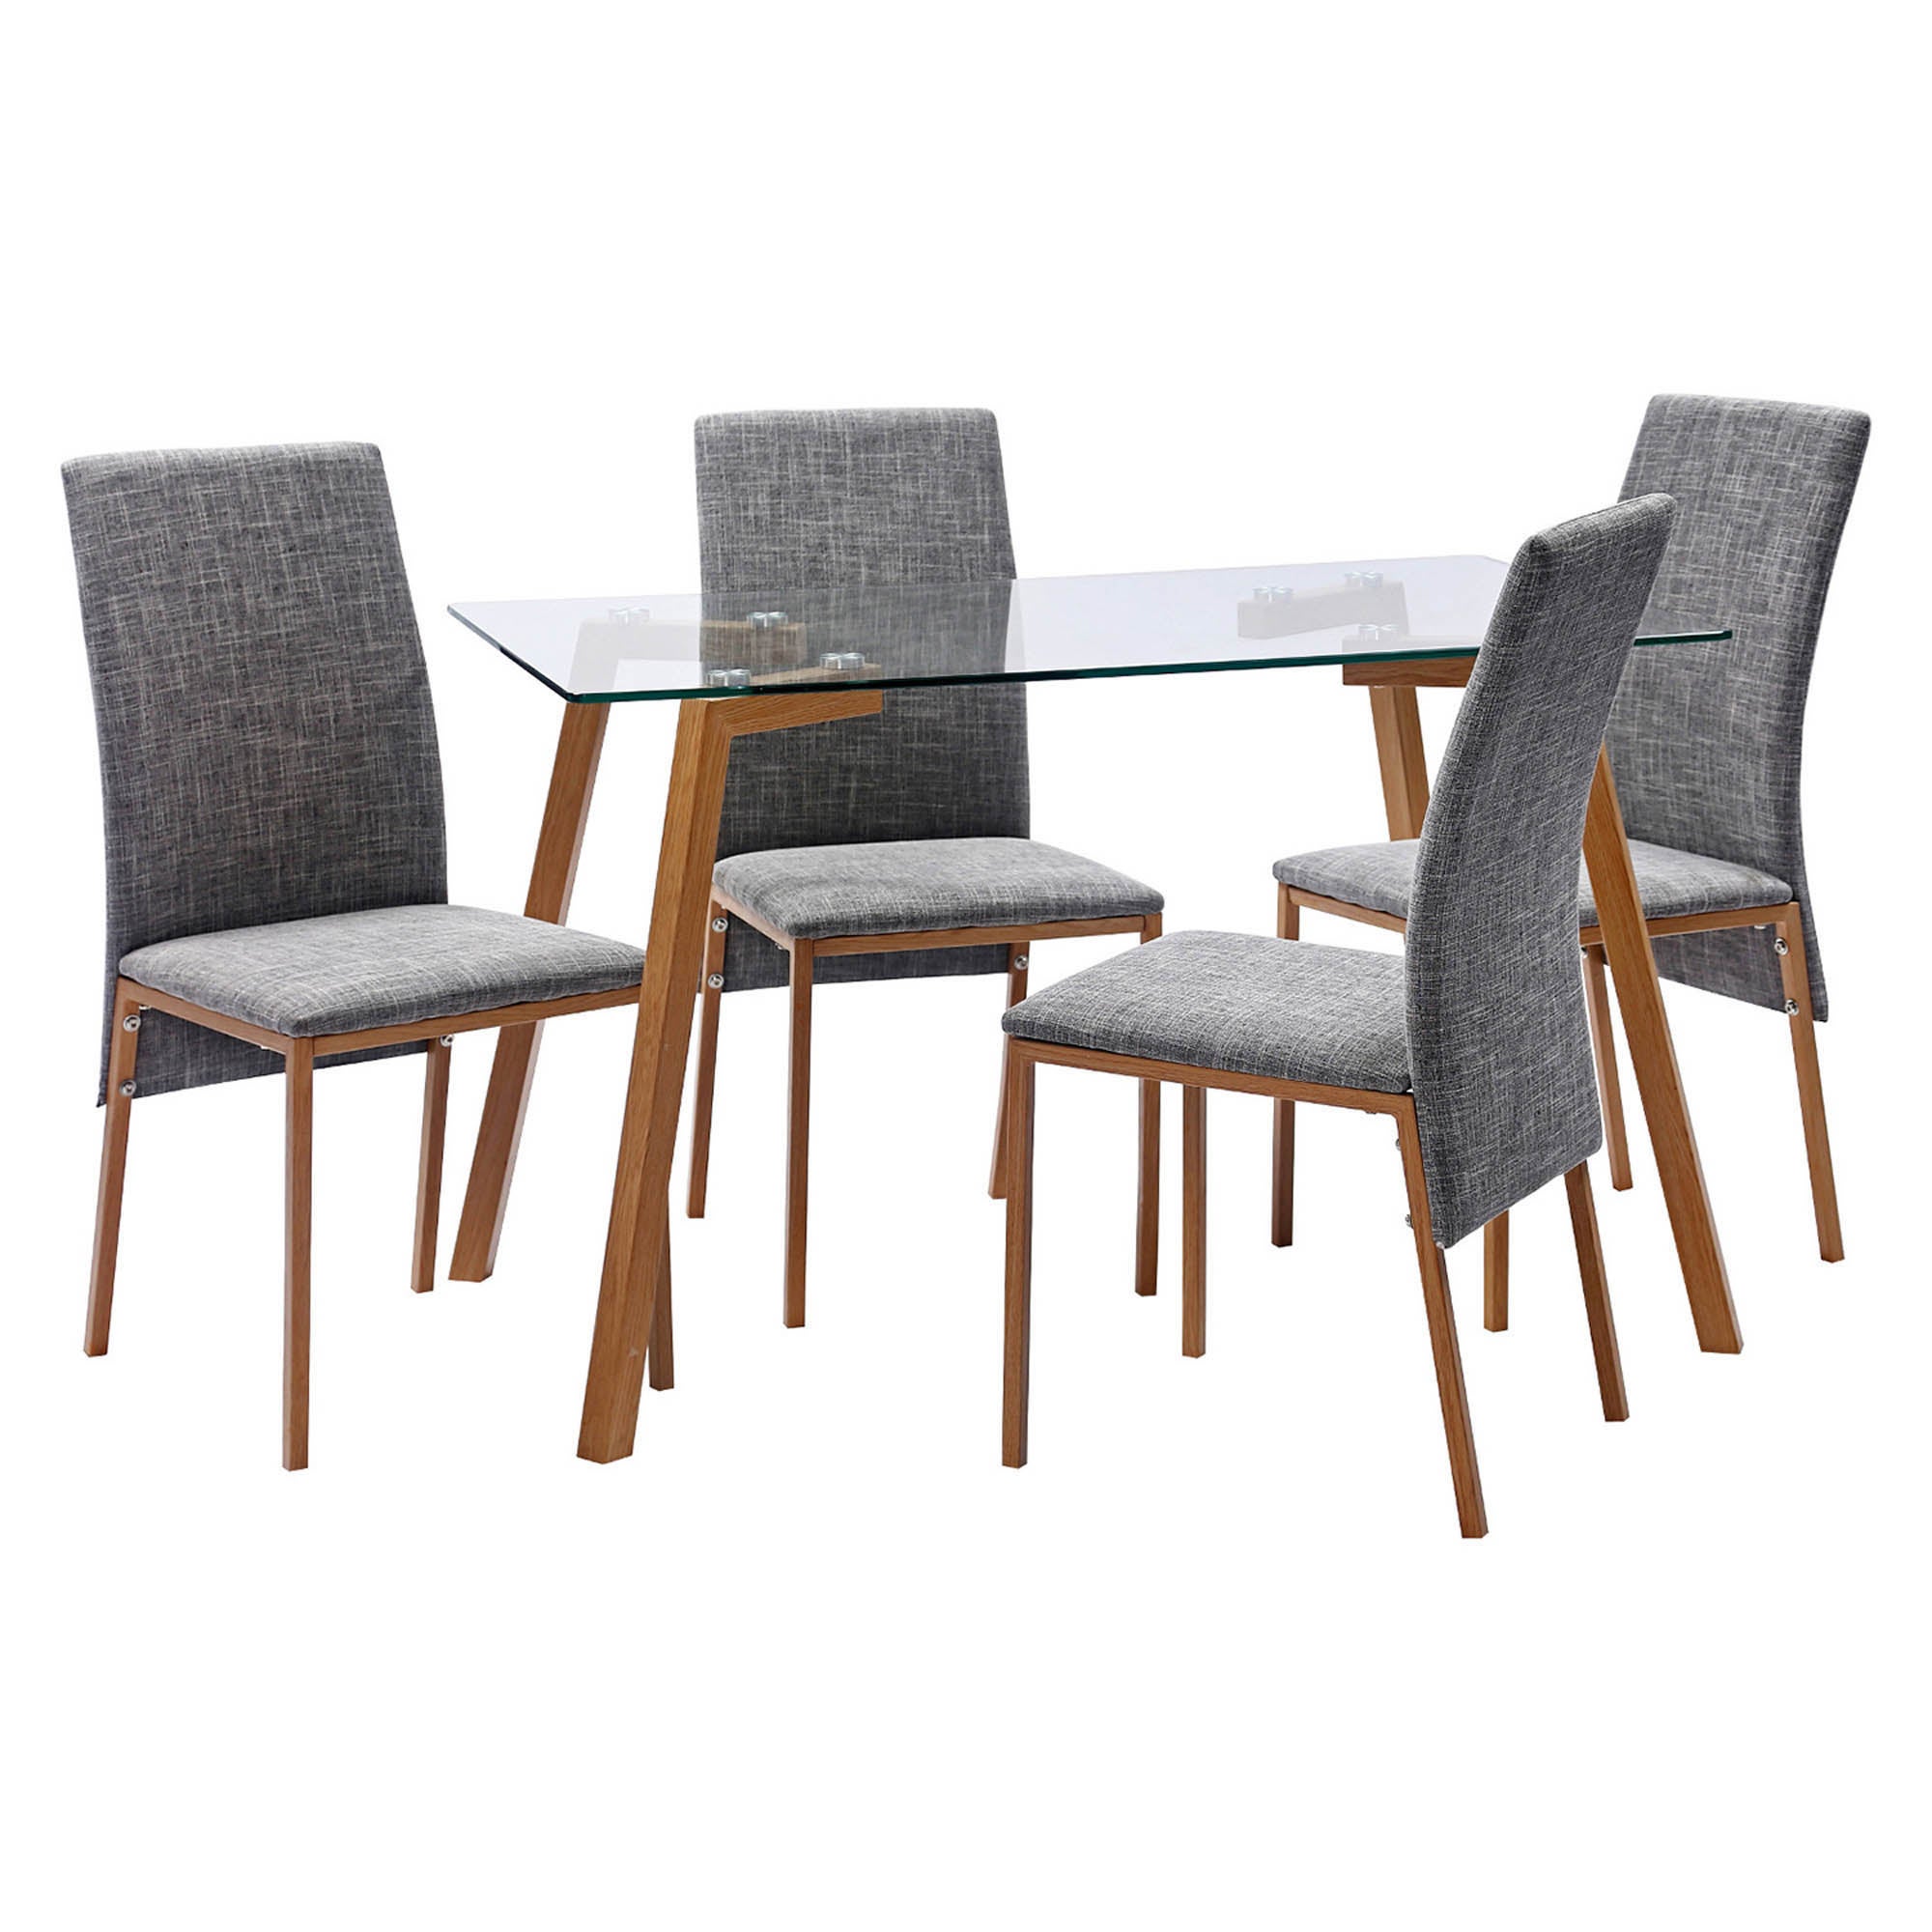 Morton Rectangular Dining Table with 4 Chairs, Grey Glass Grey